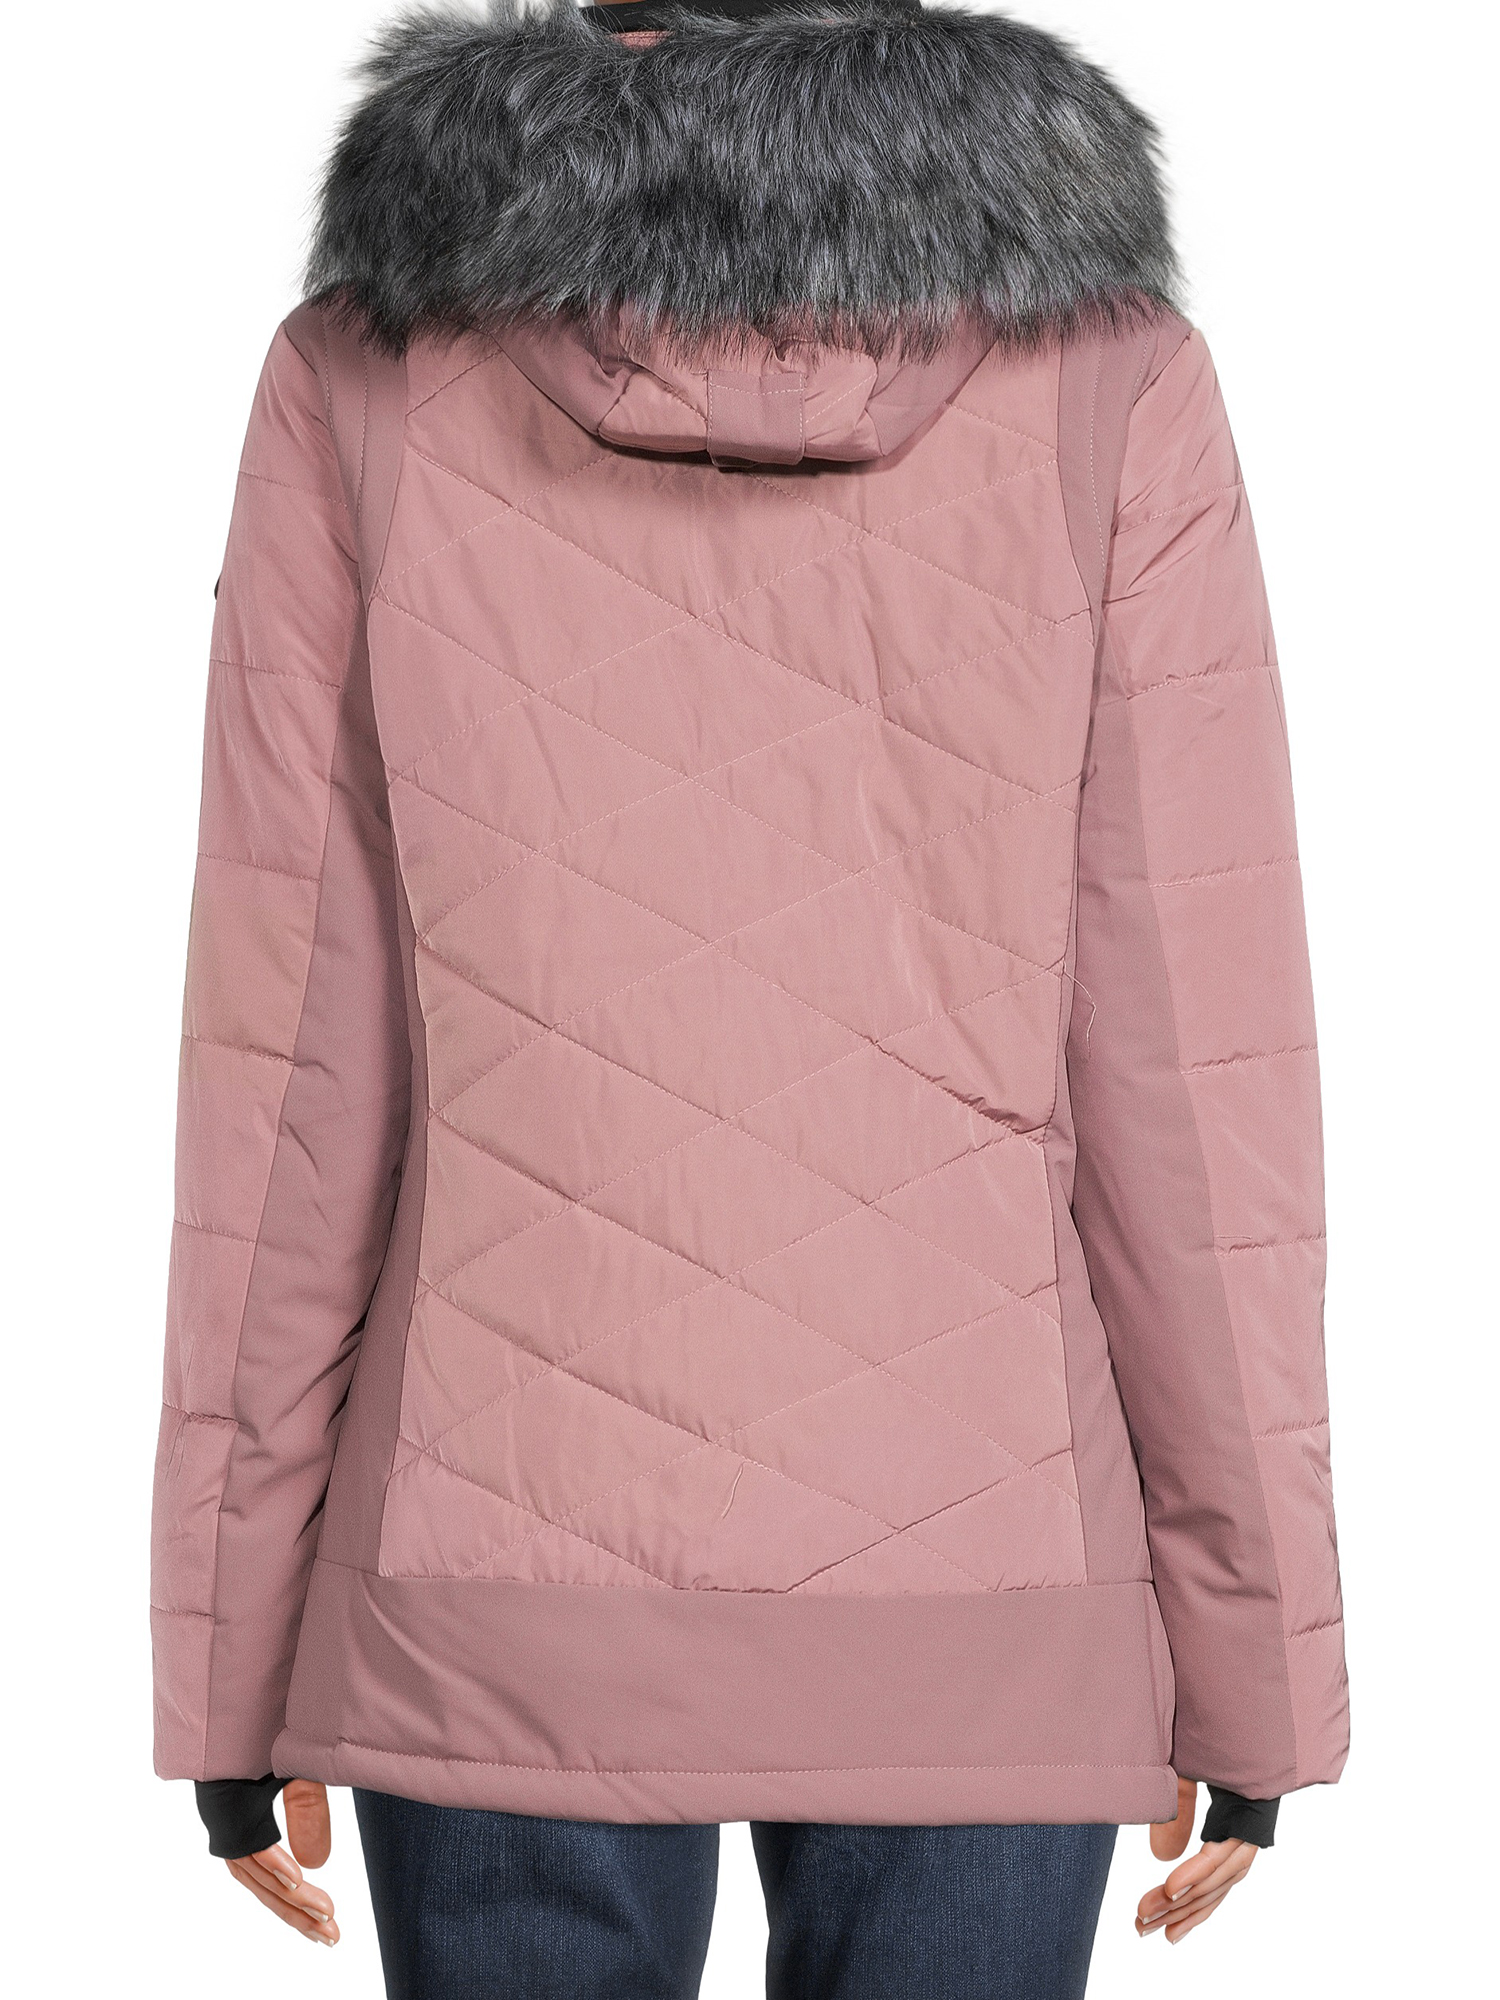 Avalanche Women's Quilted Hooded Ski Jacket - image 3 of 5